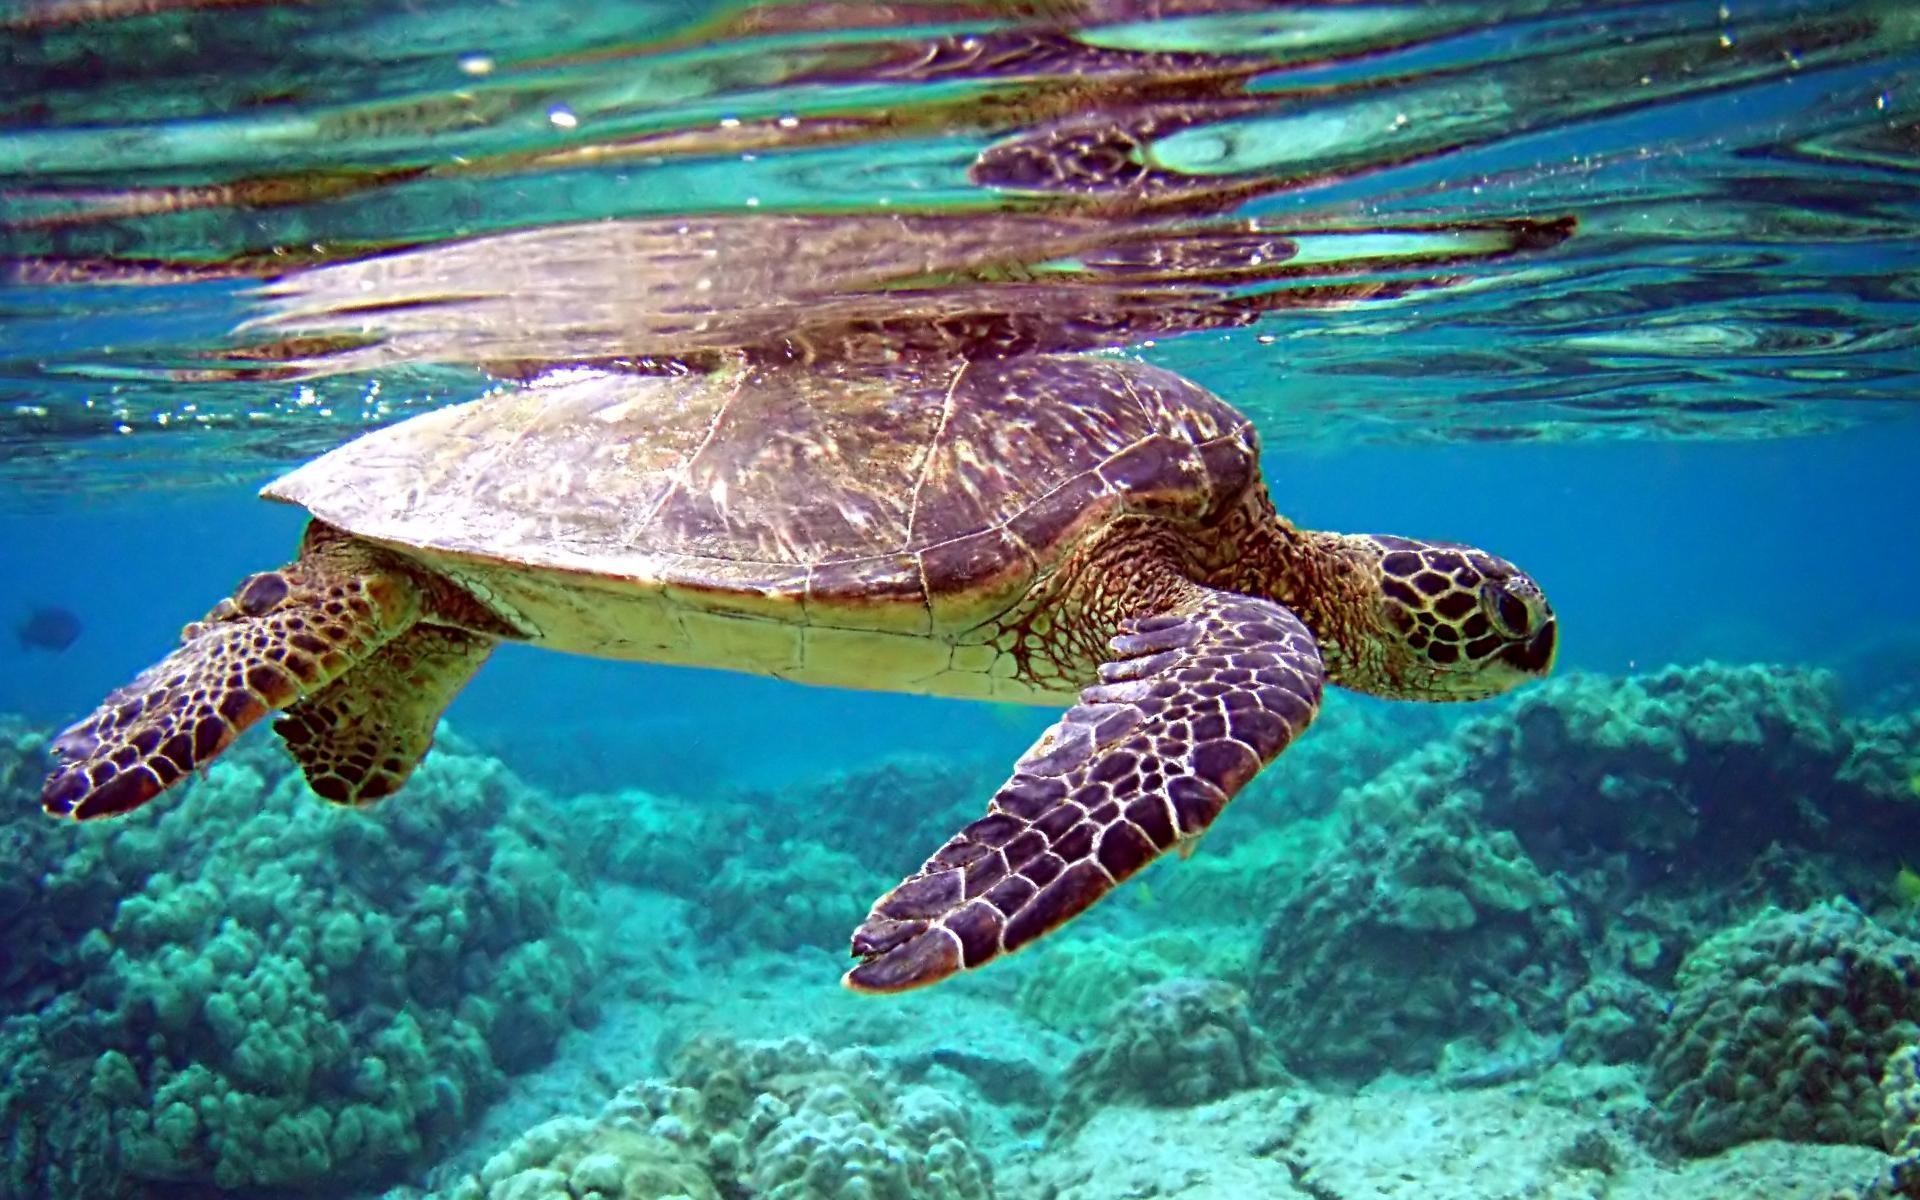 Turtle was as animal so live in water, Nature's future